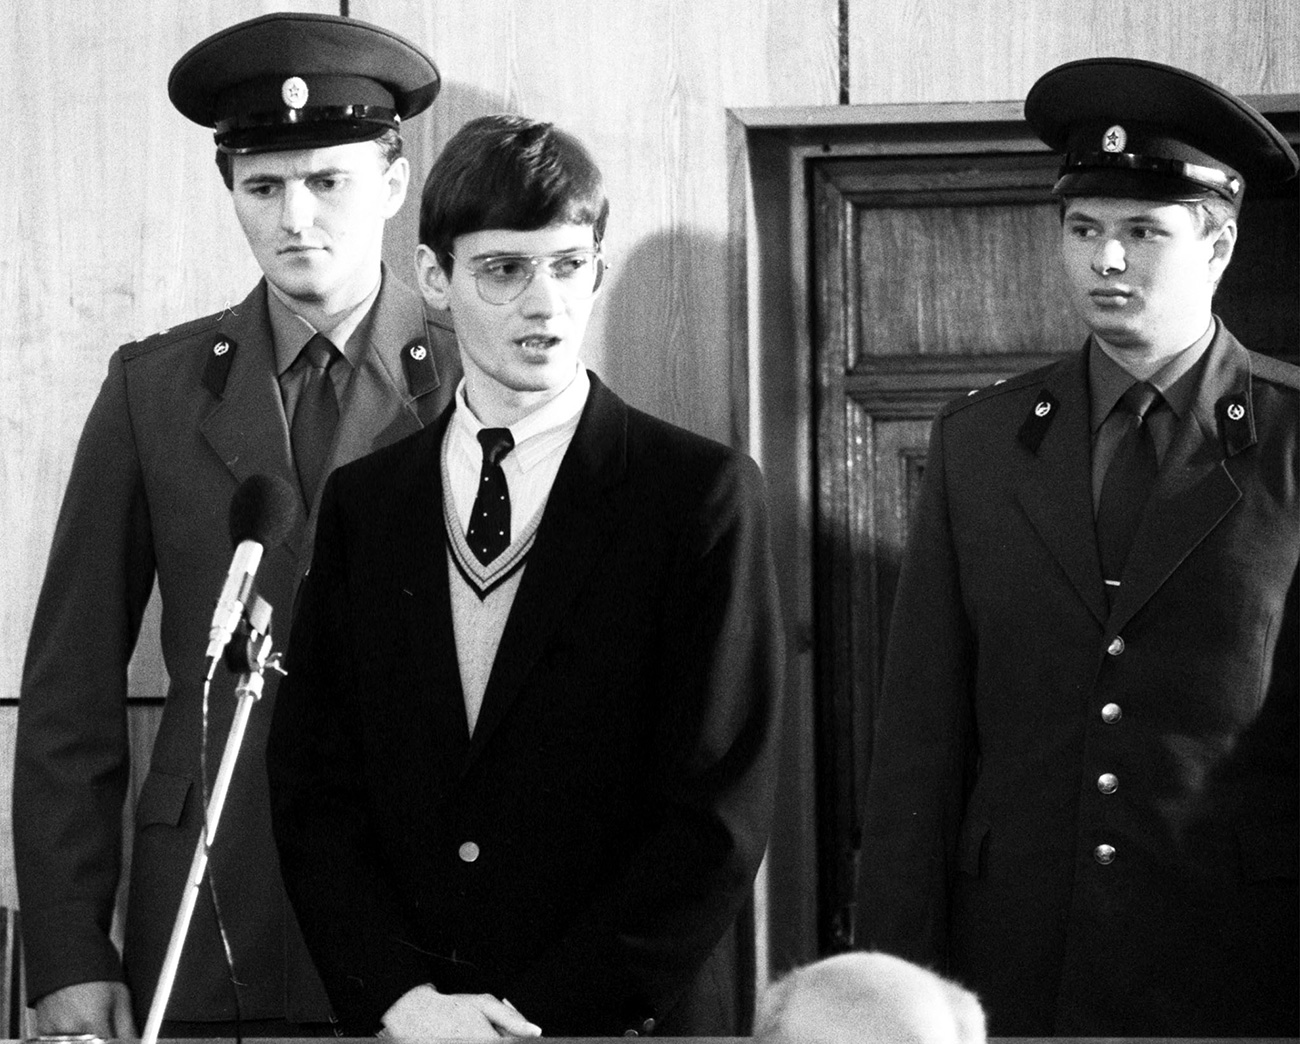  German amateur aviator Matthias Rust, centre, appears in court as he stands trial for illegally landing near Red Square in Moscow in 1987.